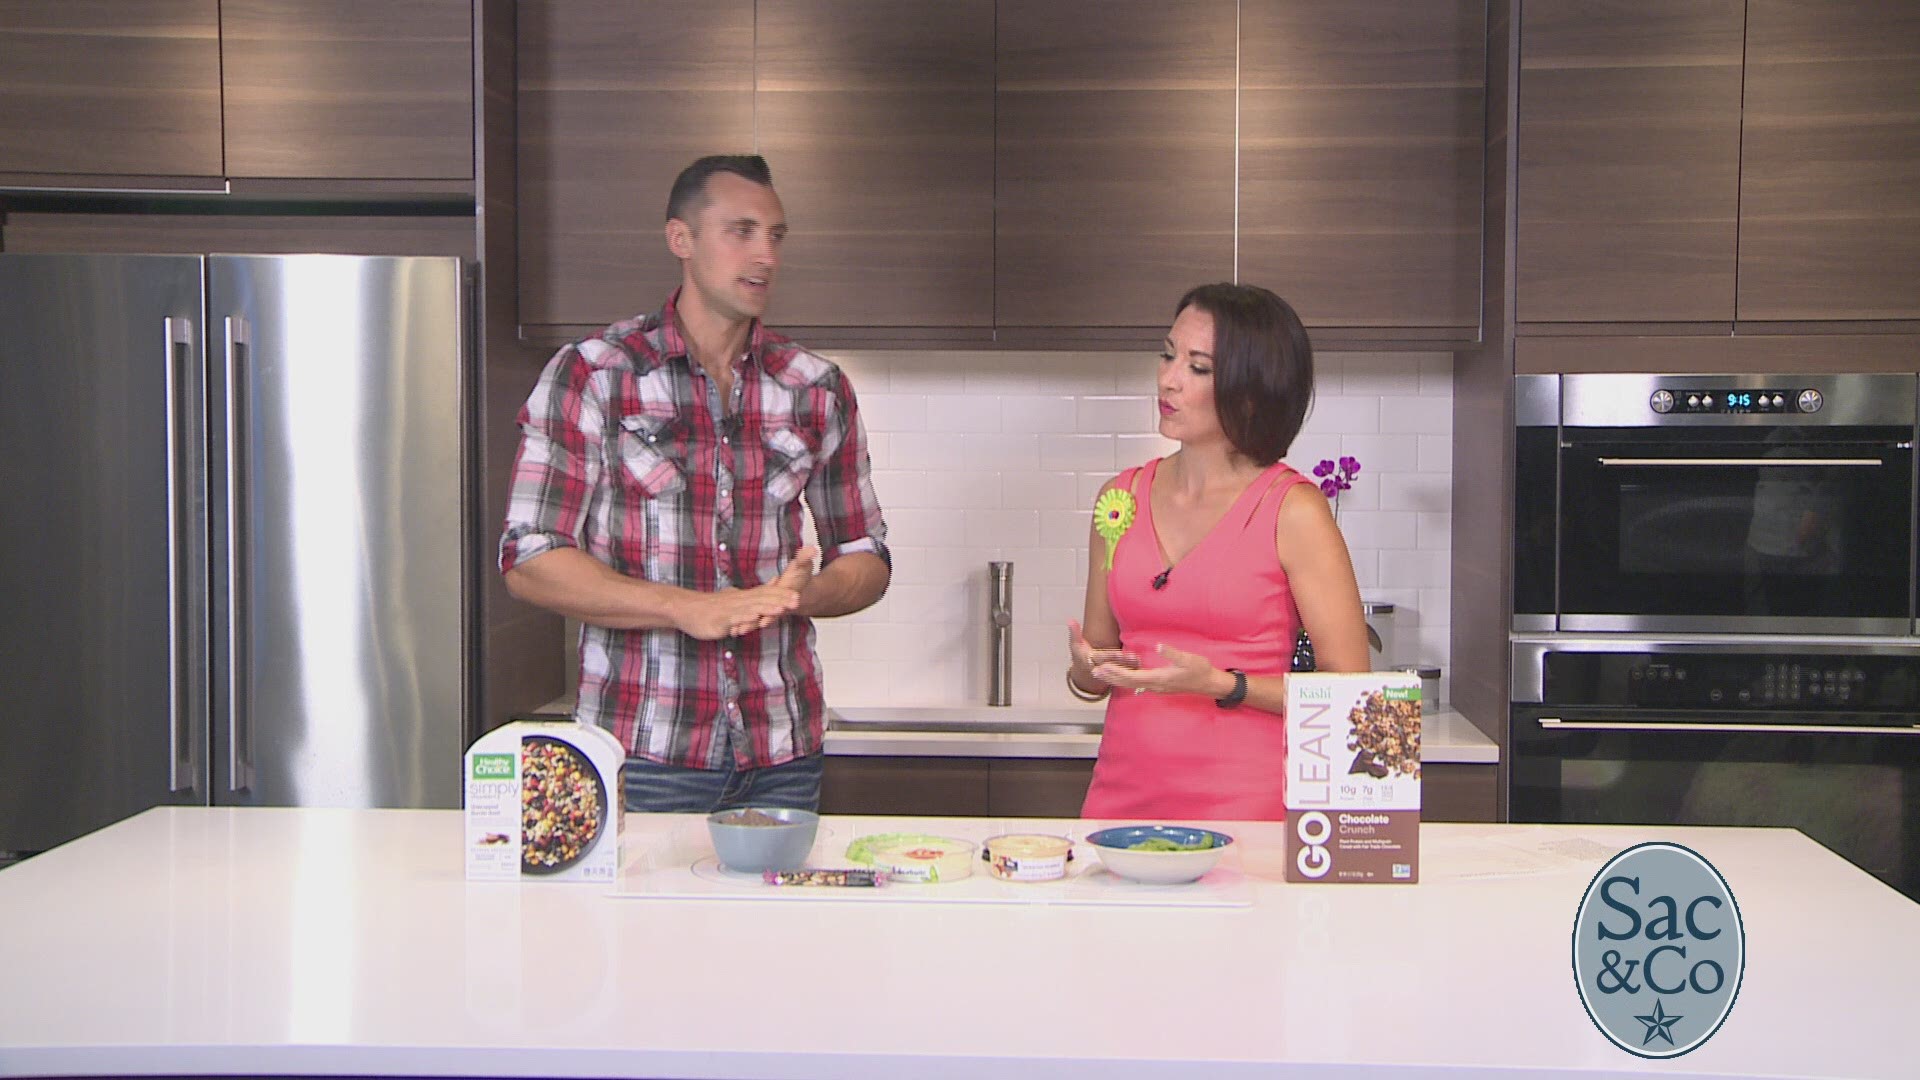 What should you be looking for when reading nutrition labels? Fitness Expert, Brandon Daniel's tells us!